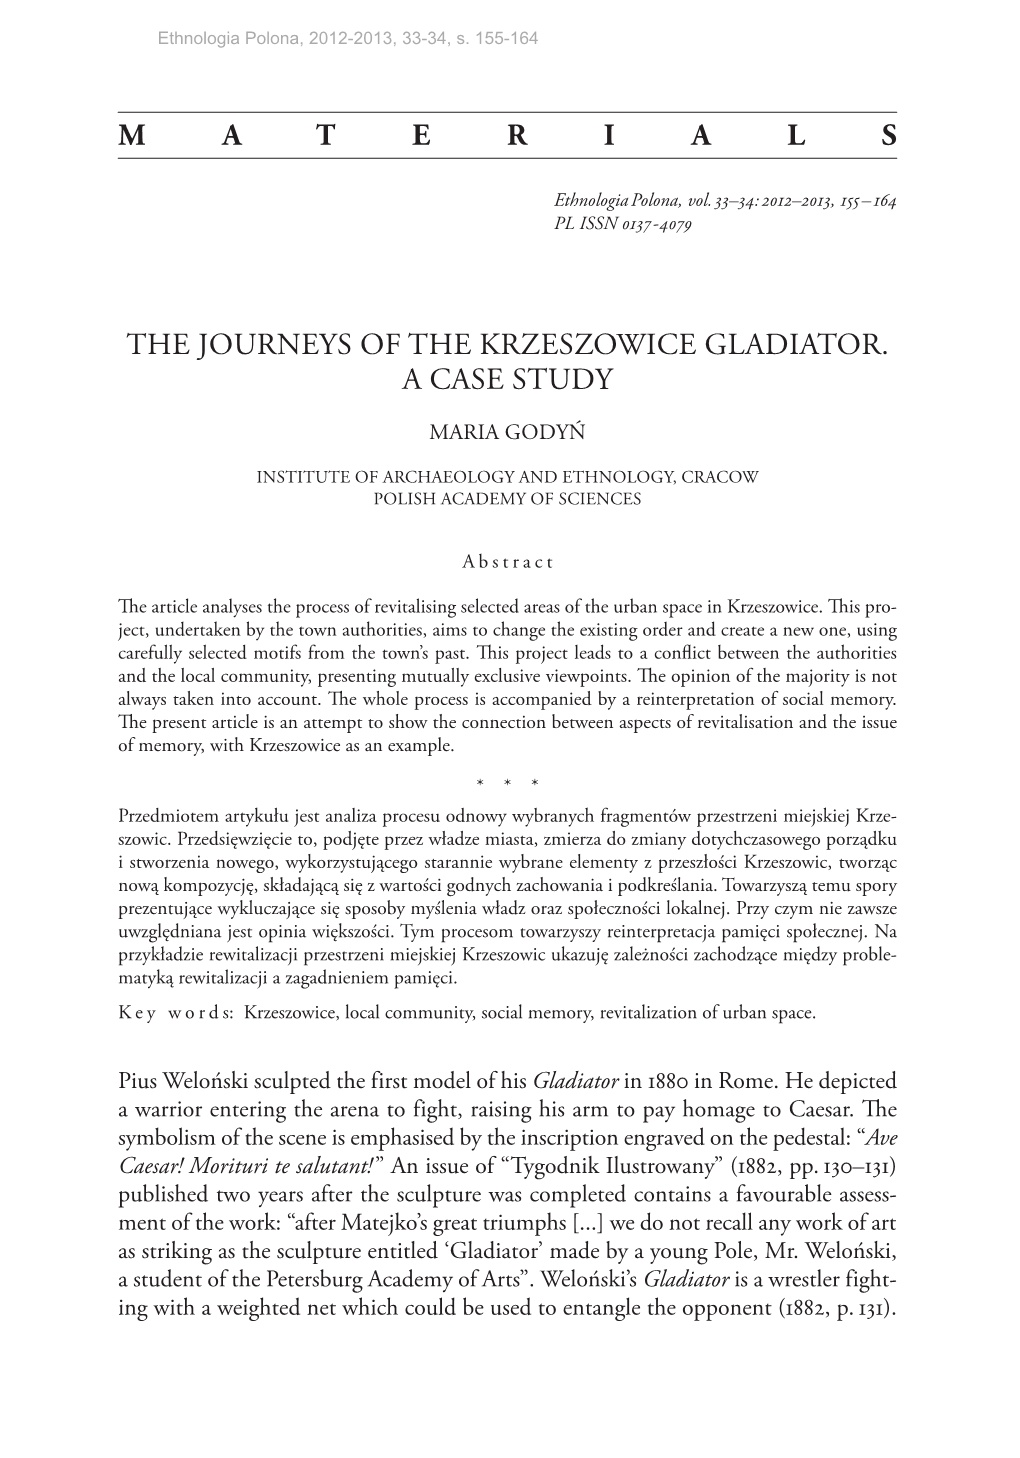 The Journeys of the Krzeszowice Gladiator. a Case Study